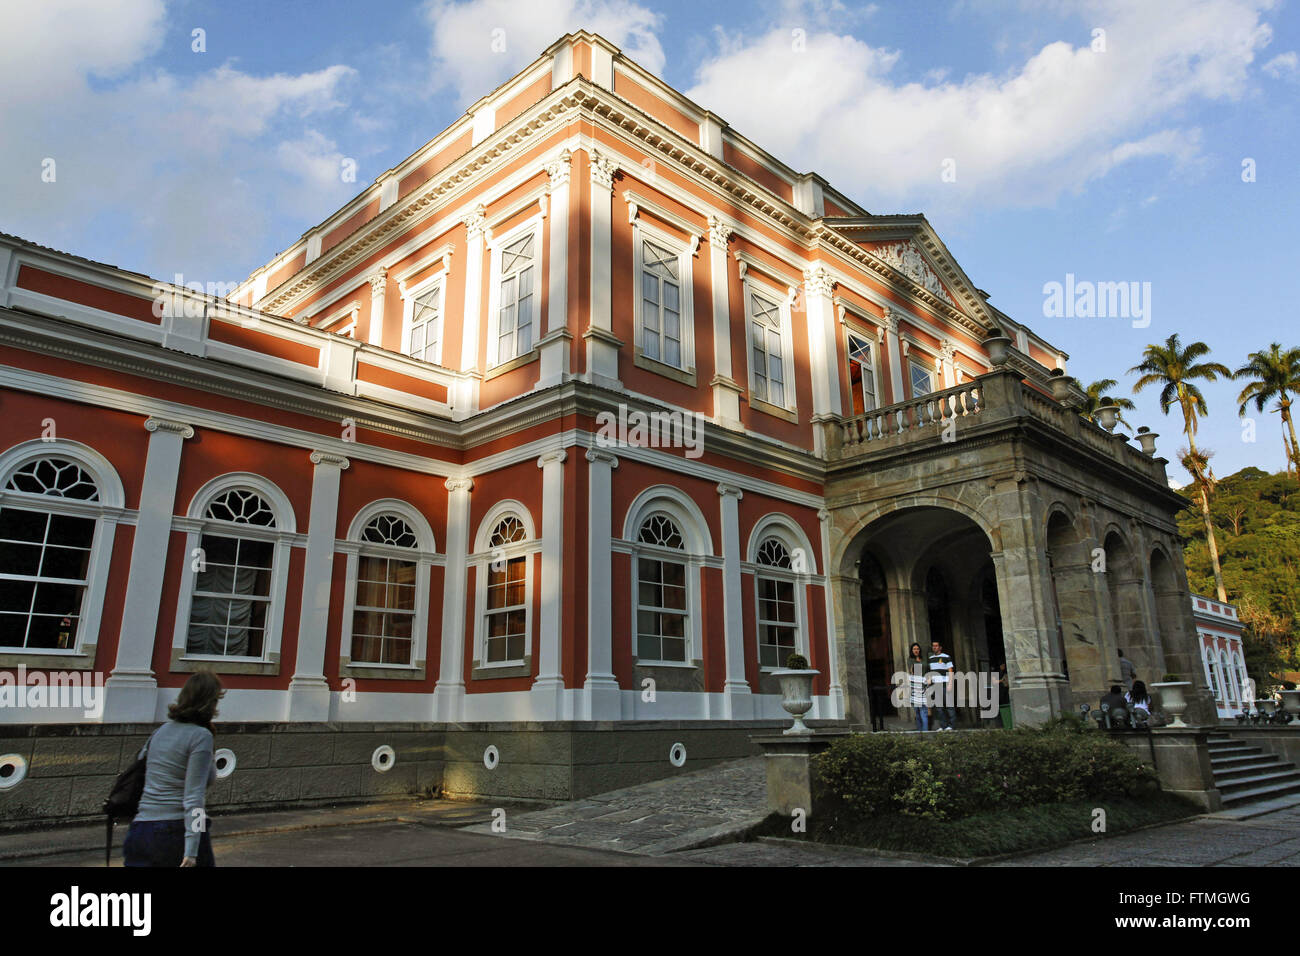 Facade of the Imperial Museum built between 1845 and 1864 - historic center of Petropolis Stock Photo